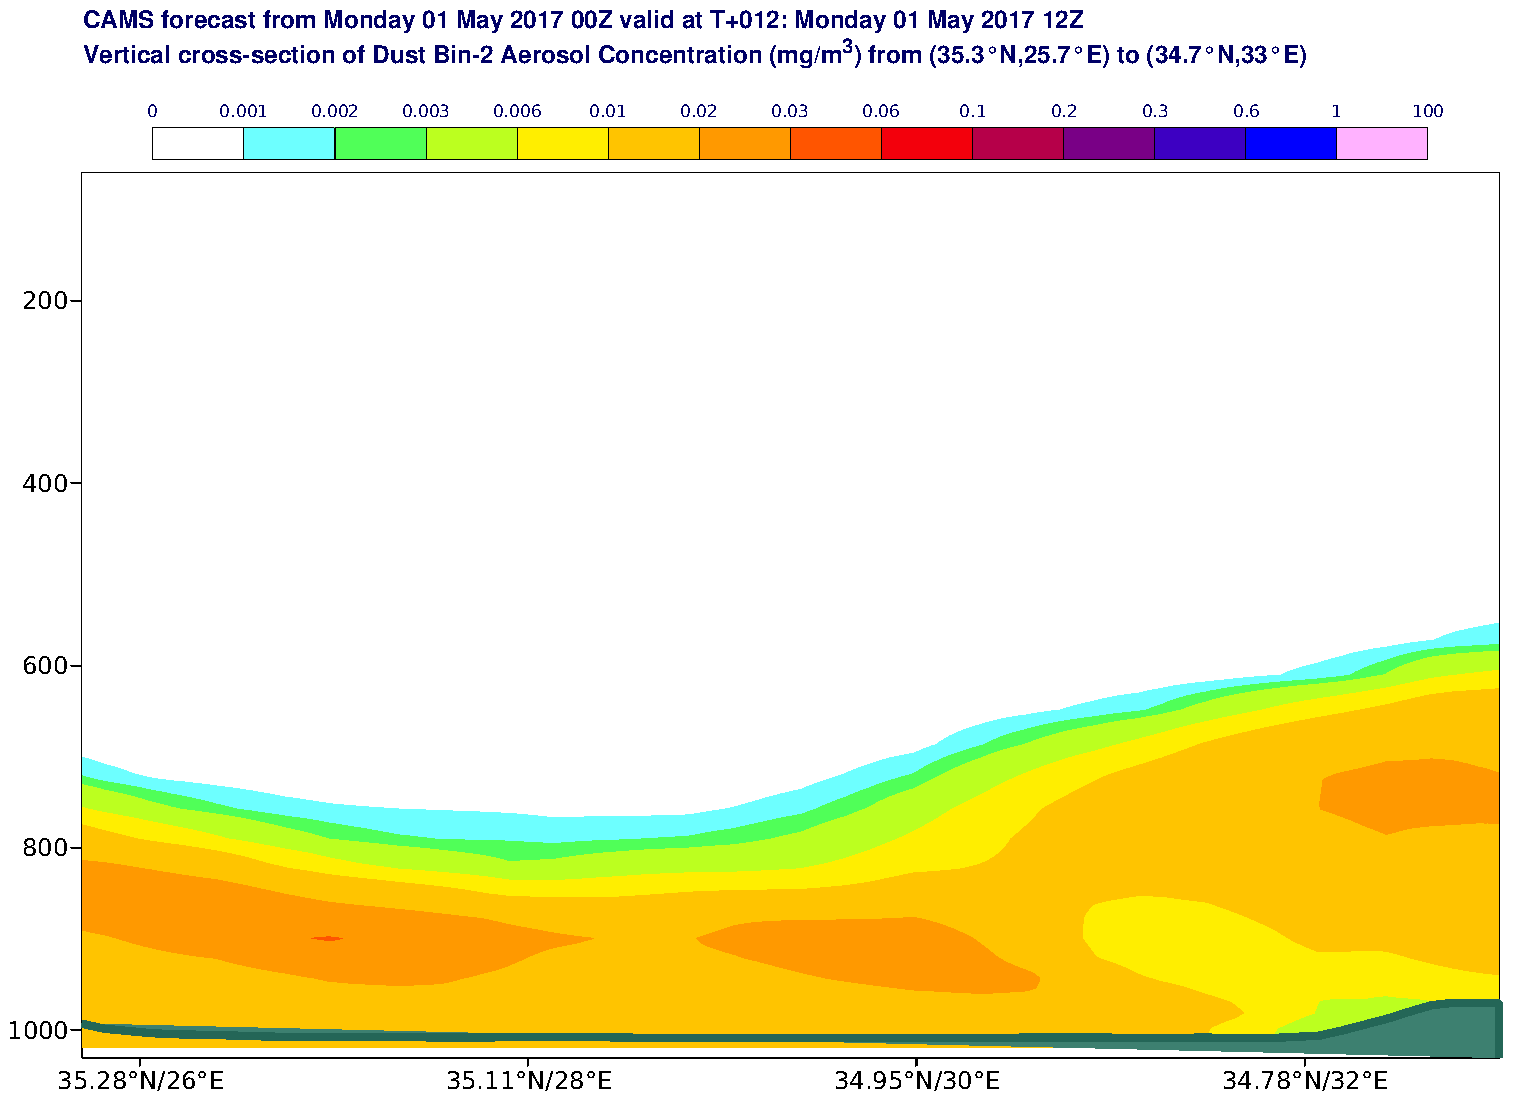 Vertical cross-section of Dust Bin-2 Aerosol Concentration (mg/m3) valid at T12 - 2017-05-01 12:00